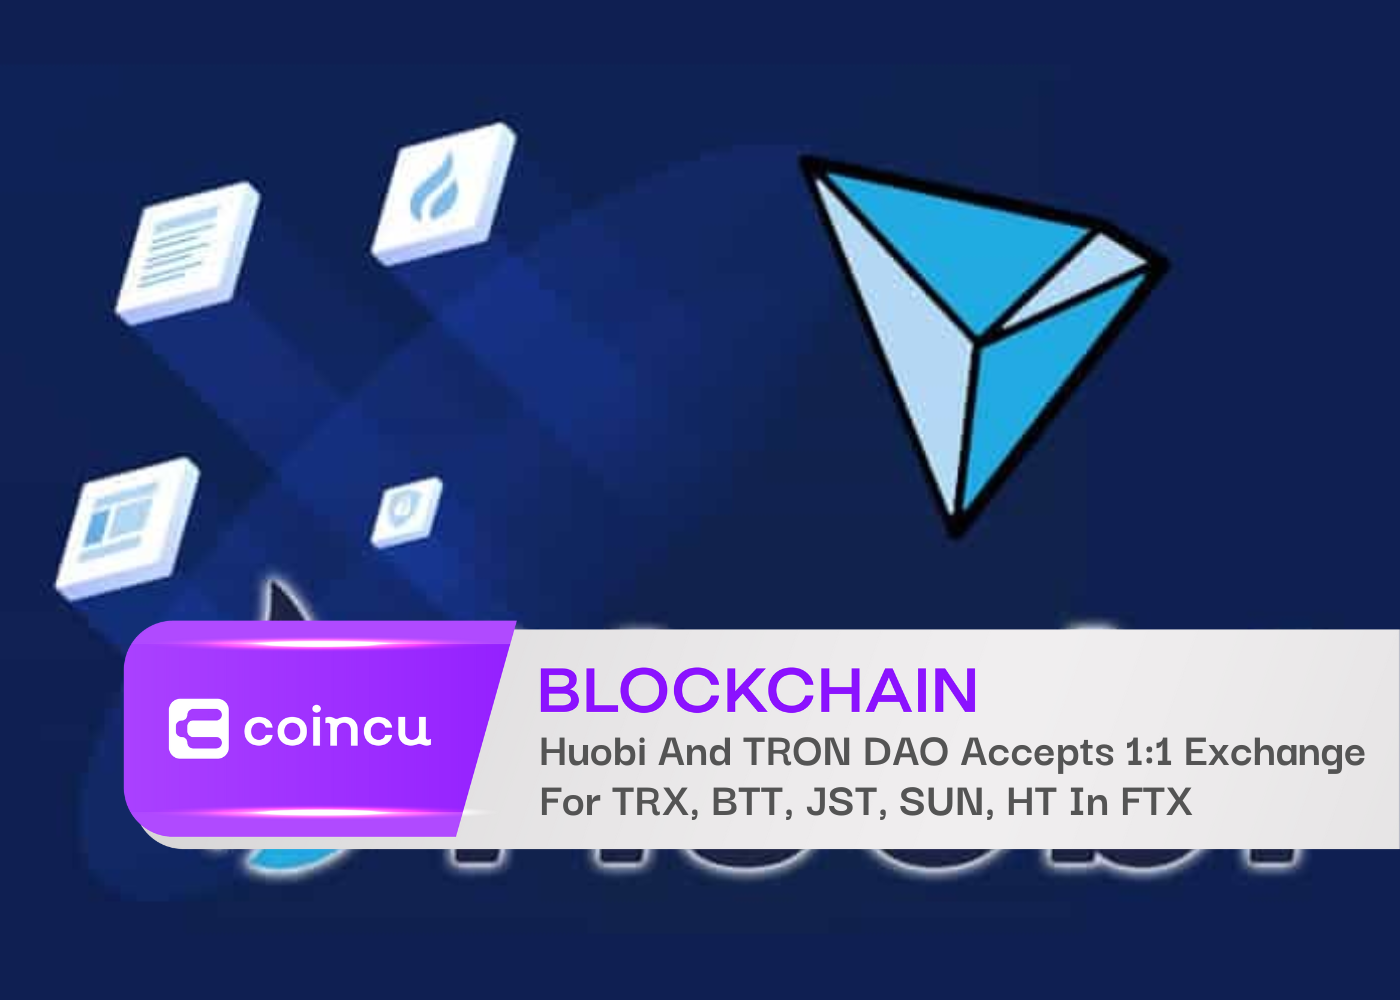 Huobi And TRON DAO Accepts 1:1 Exchange For TRX, BTT, JST, SUN, HT In FTX